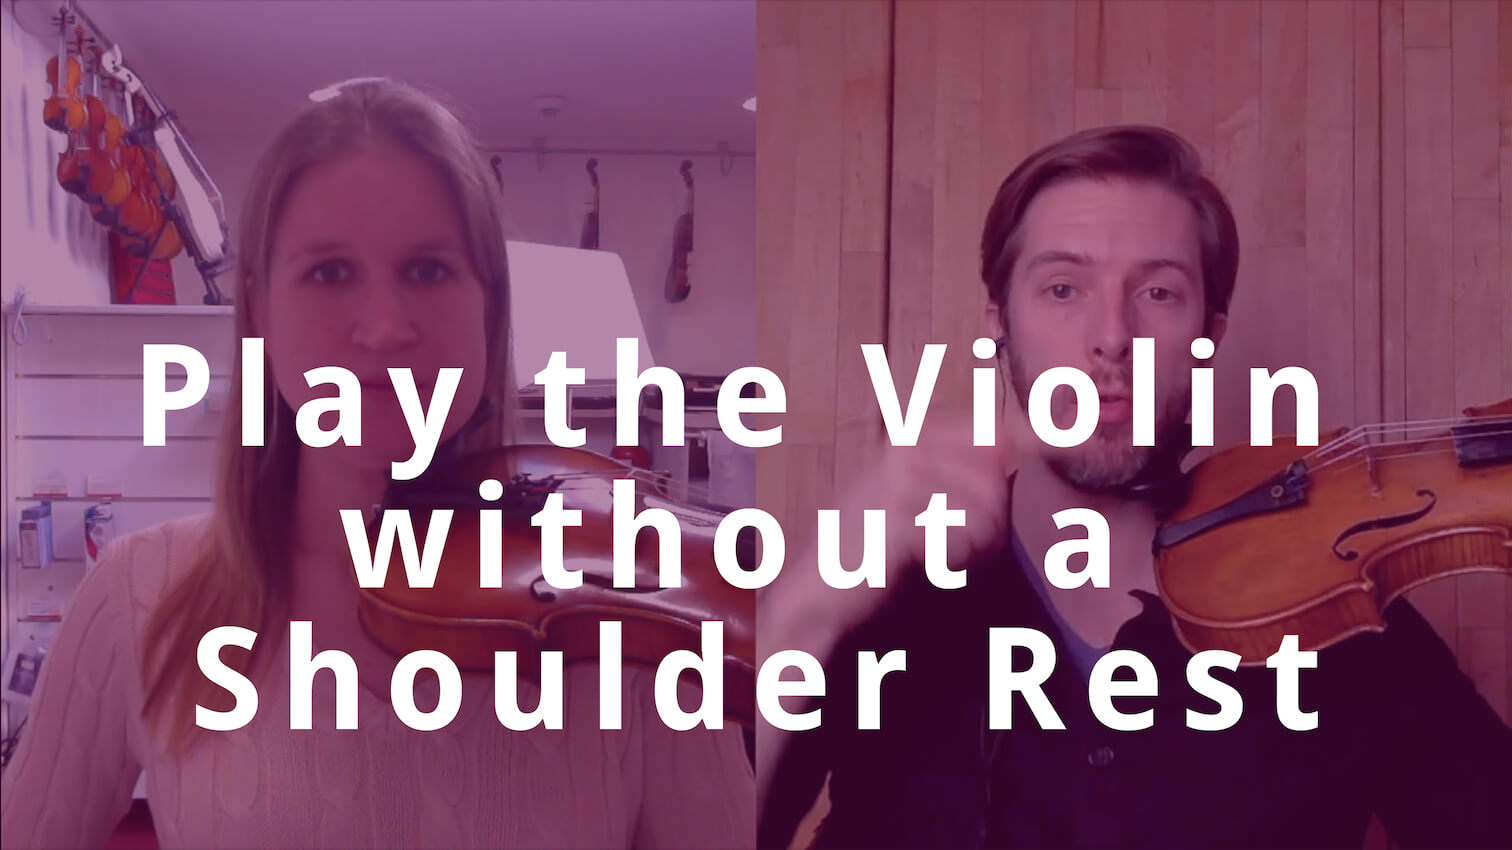 How to Play the Violin without a Shoulder Rest